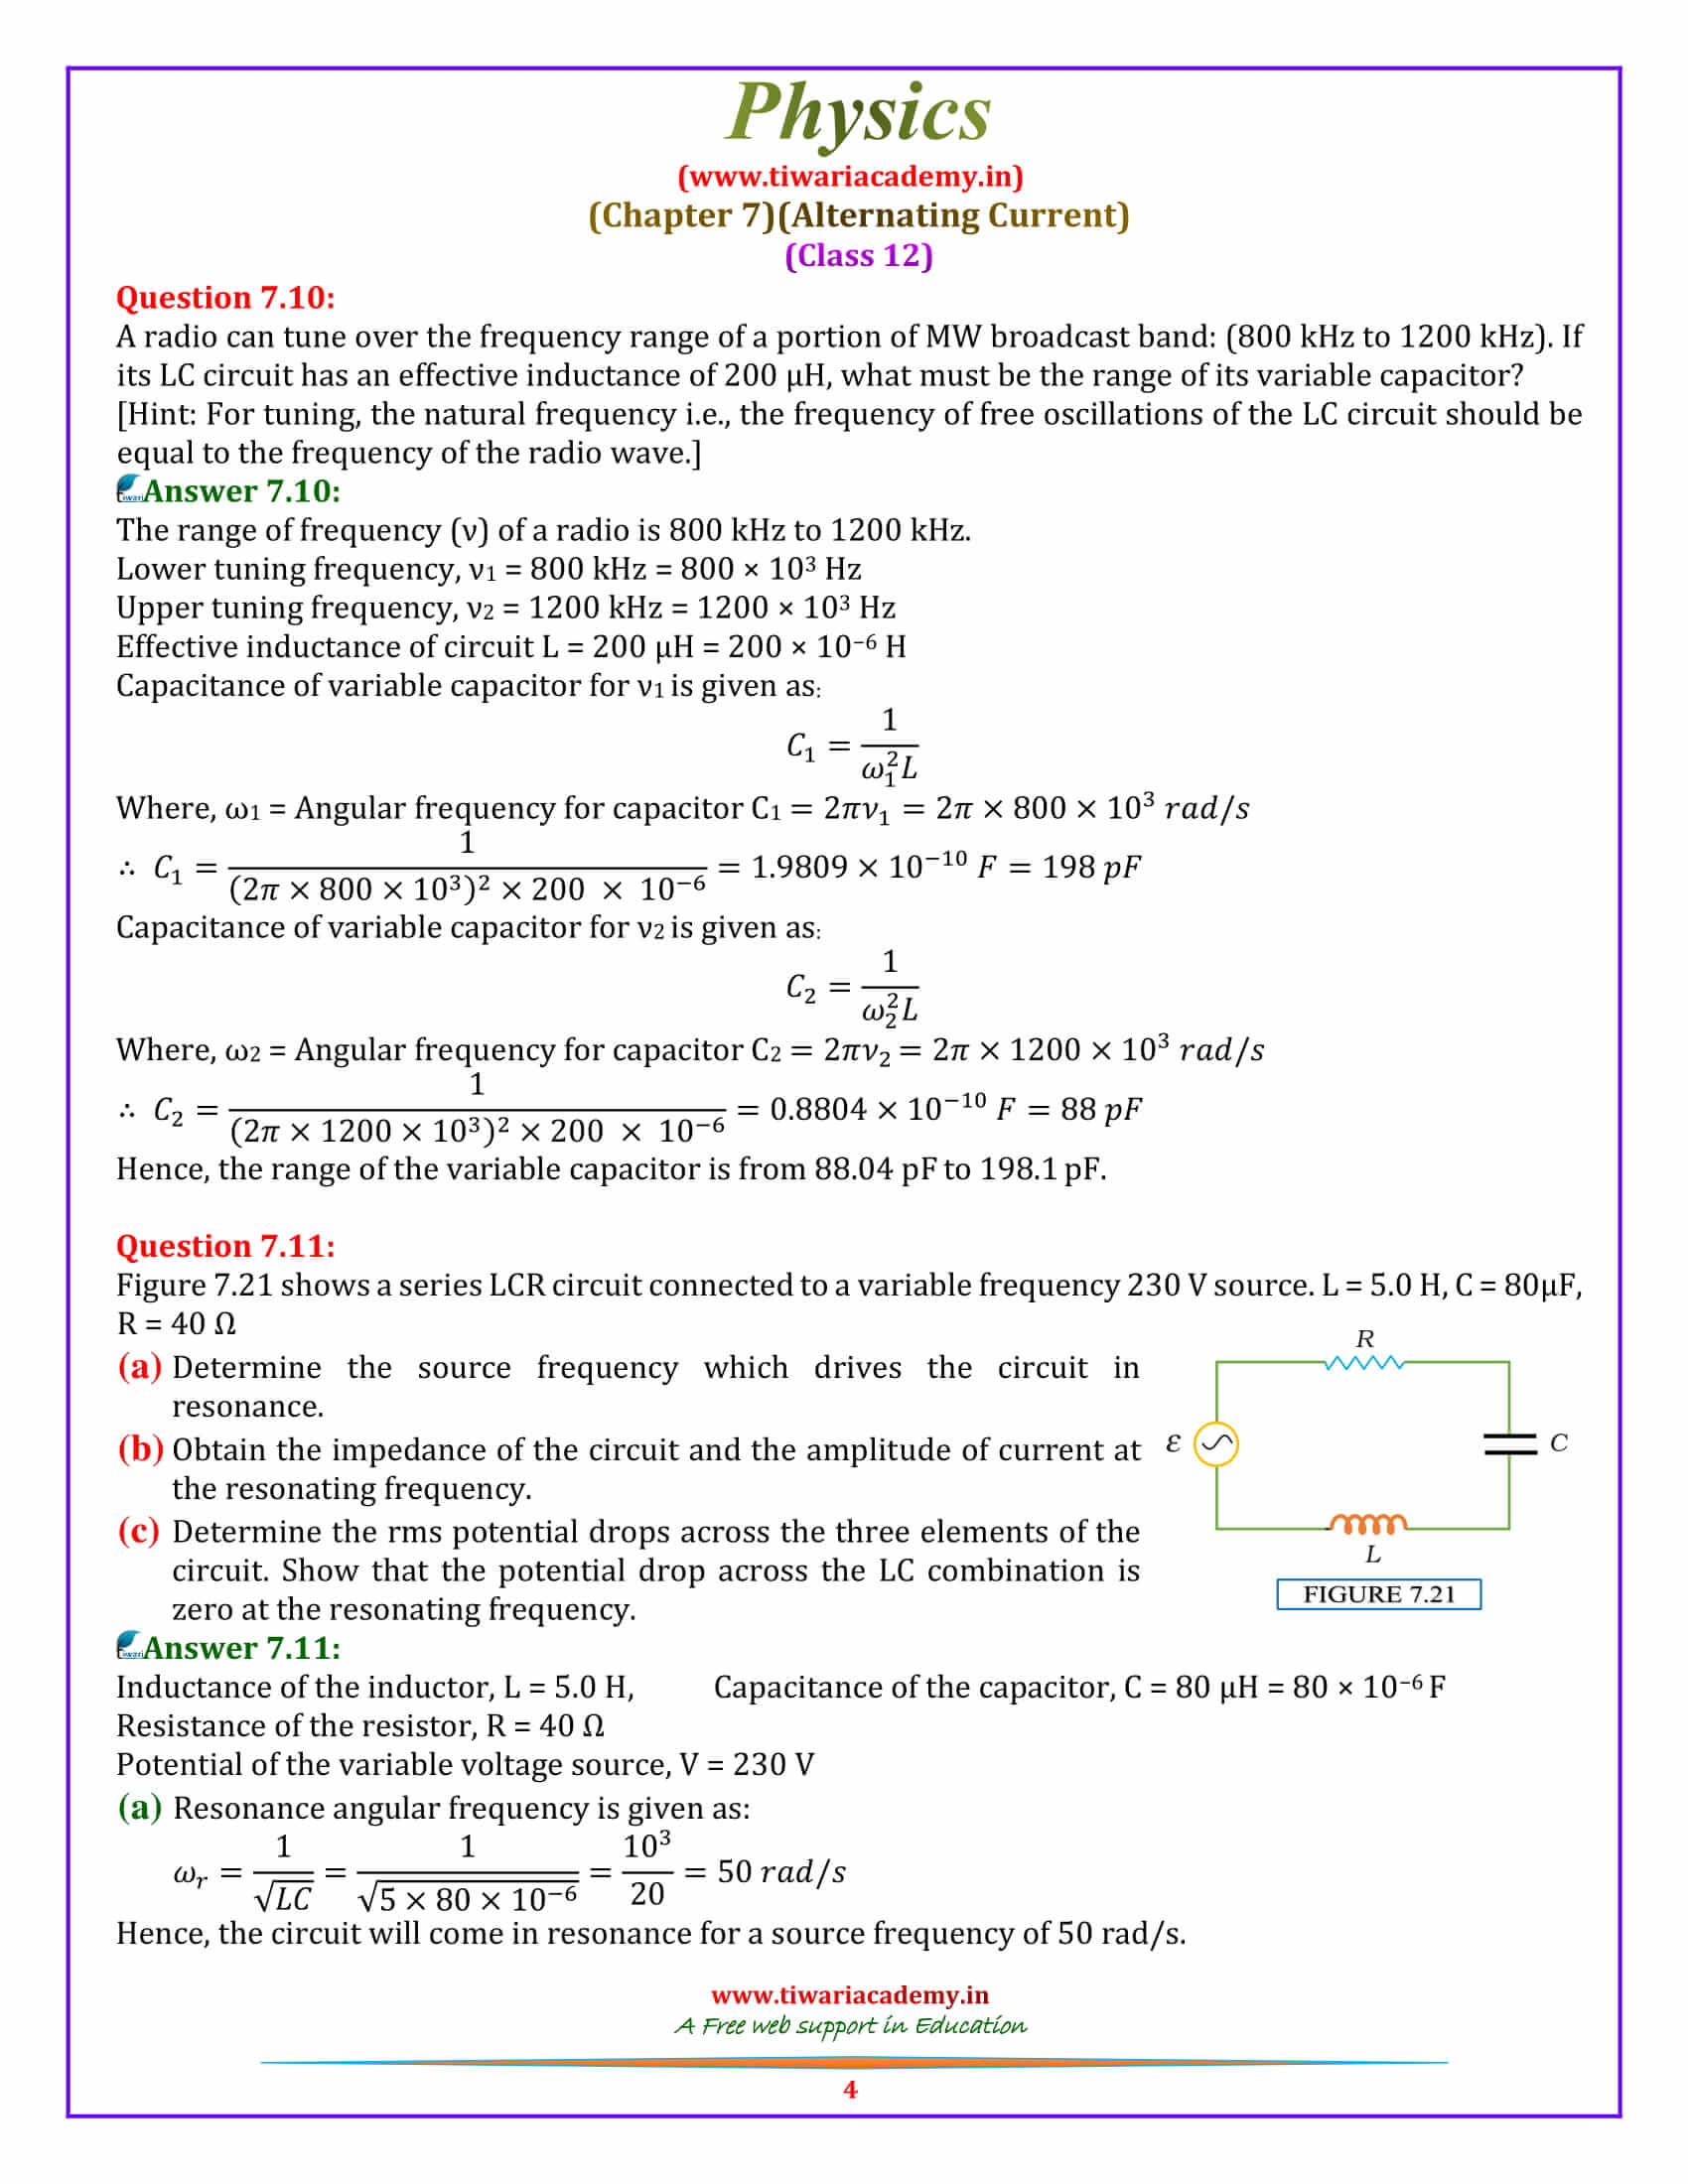 NCERT Solutions for Class 12 Physics Chapter 7 Alternating Current for +2 intermediate